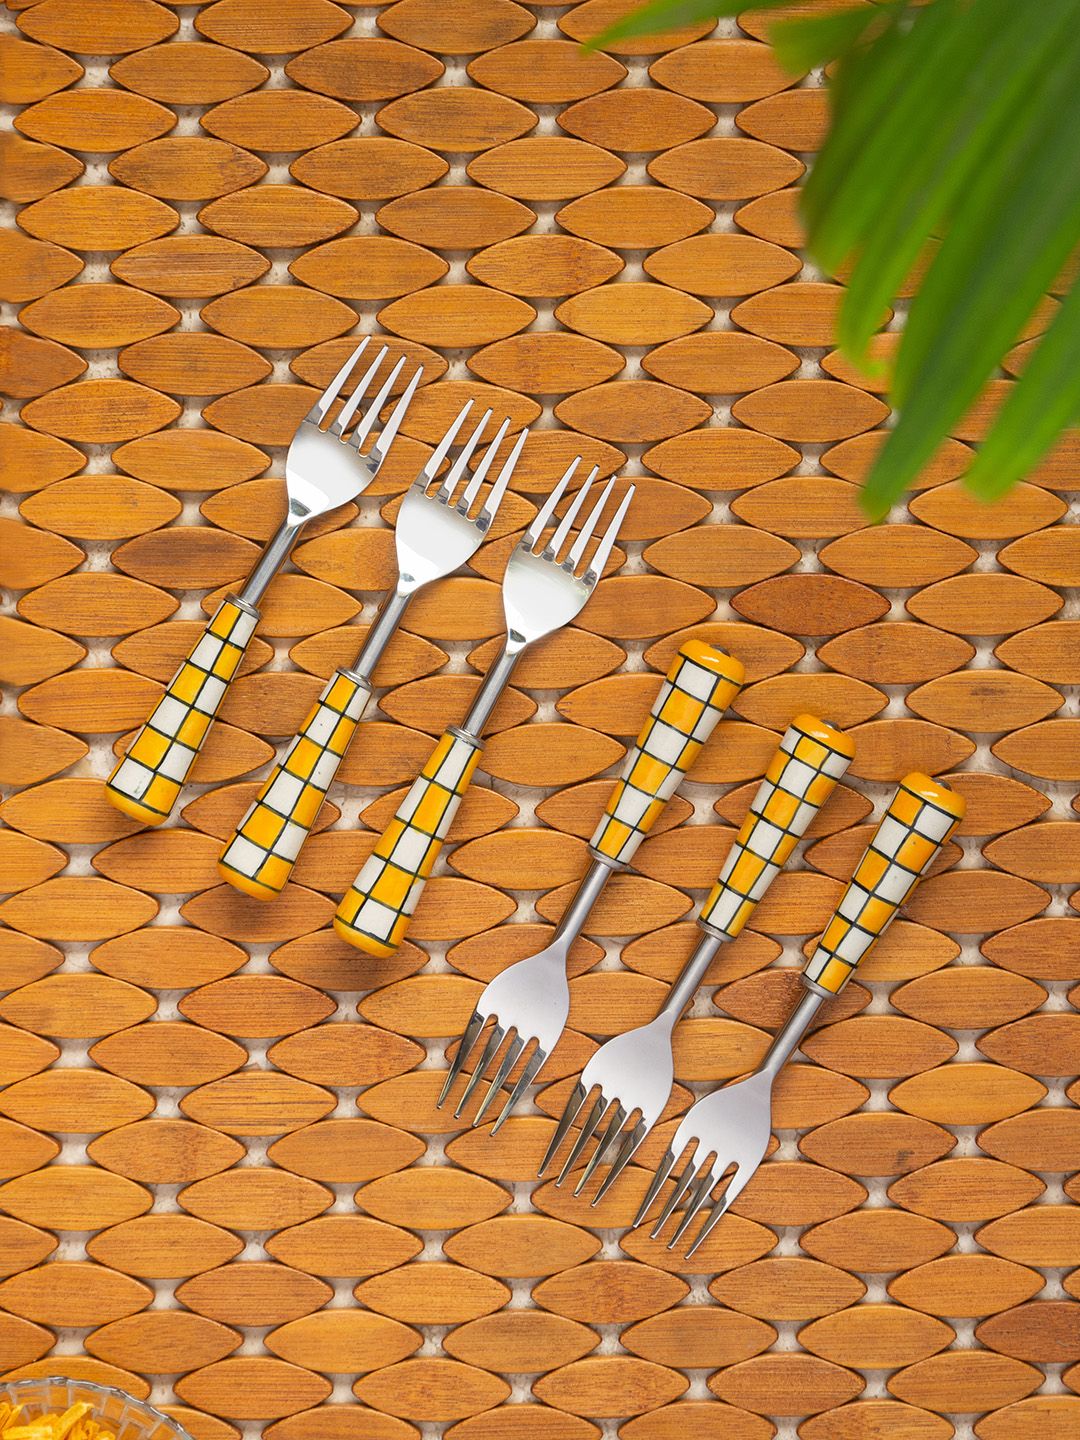 ExclusiveLane Set of 6 Yellow & White Hand-Painted Stainless Steel Table Fork Set Price in India